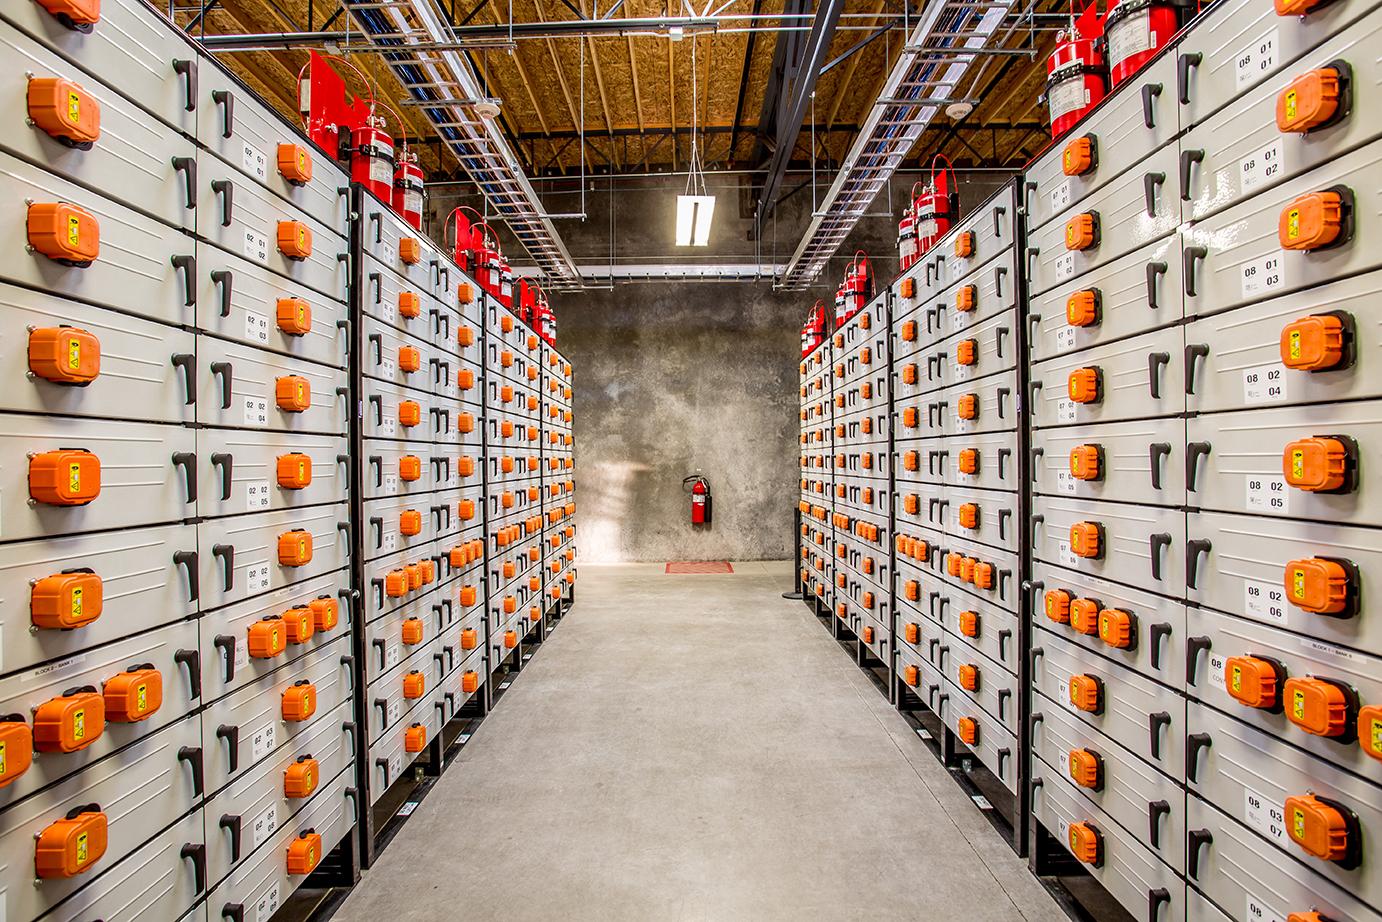 Building Energy Storage Systems For Smarter Power Grids To Accomodate